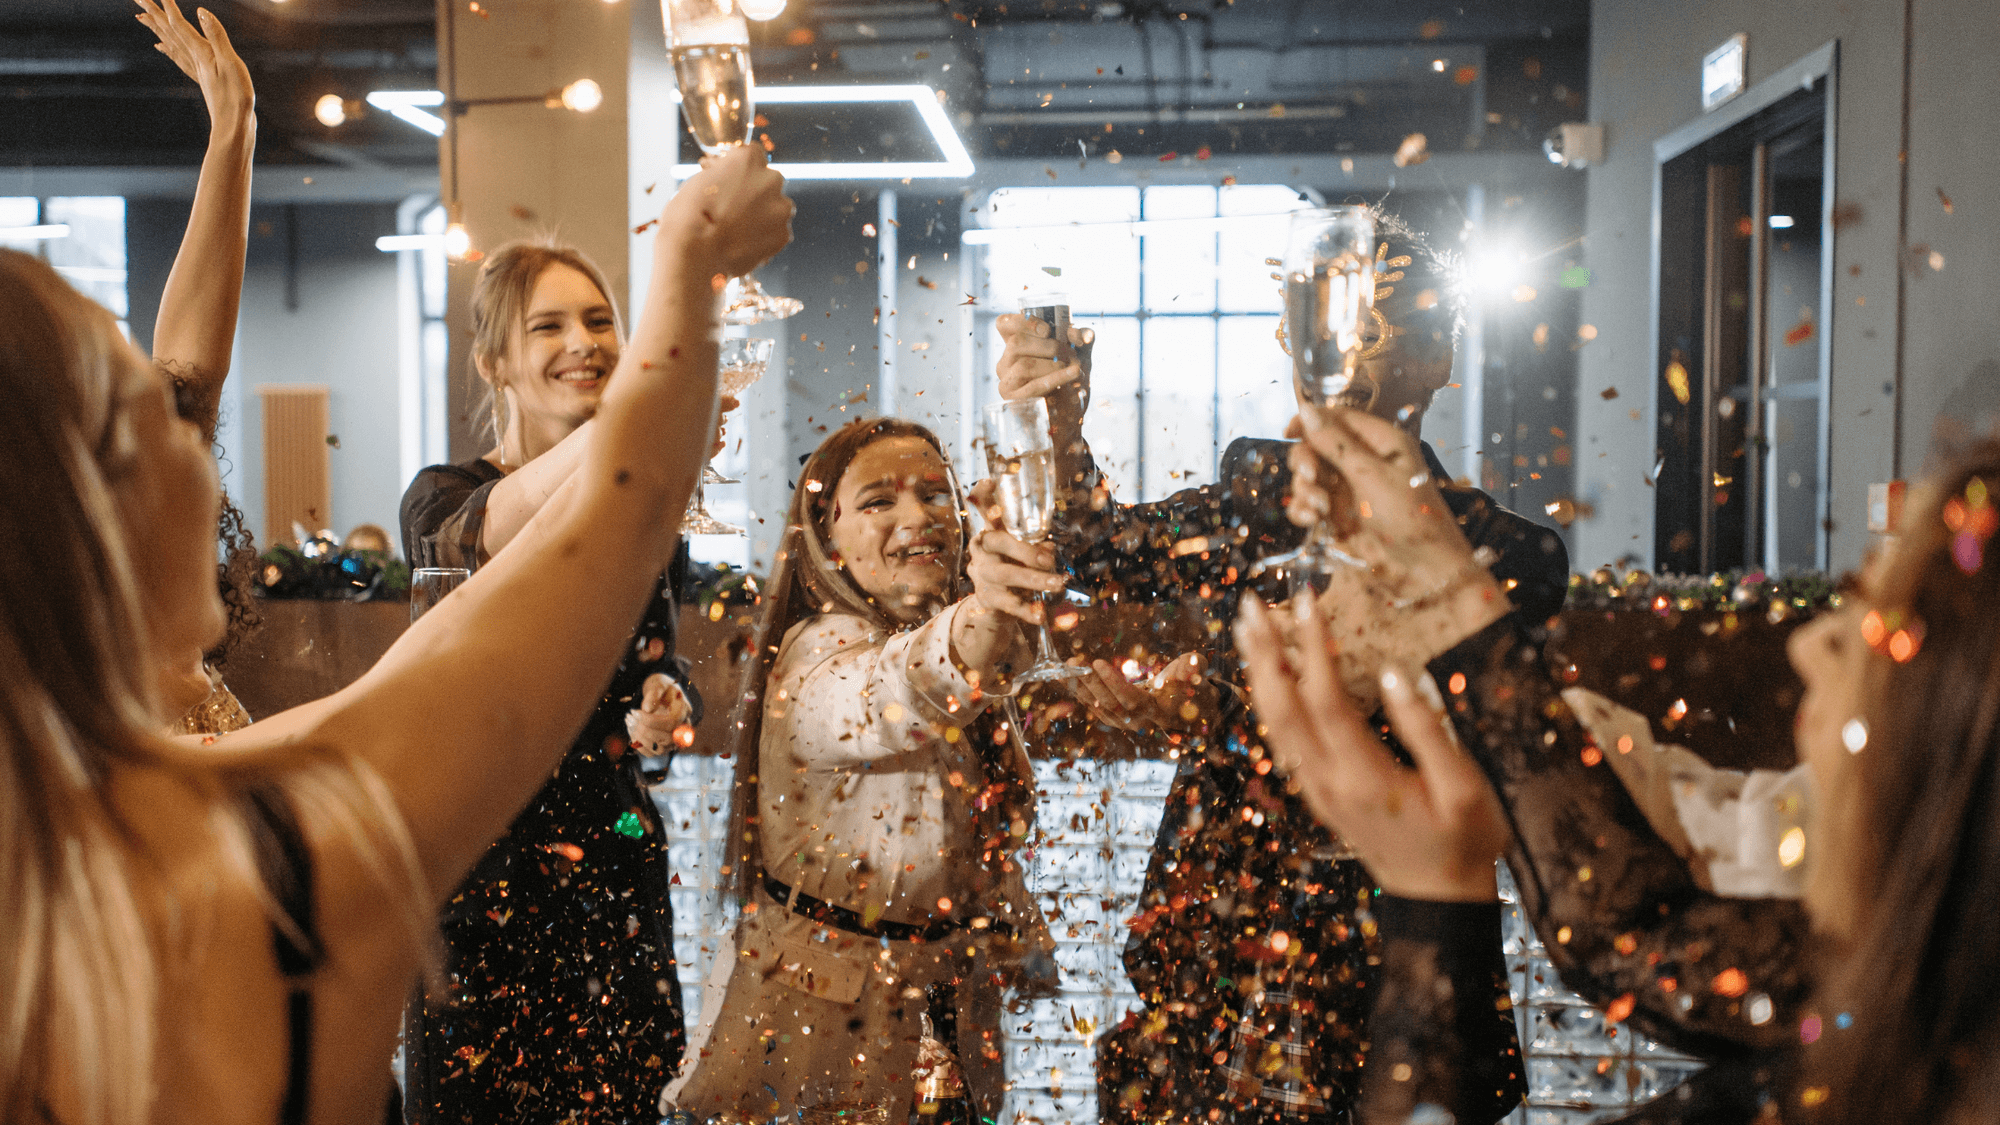 How to Have Inclusive Holiday Celebrations in the Workplace